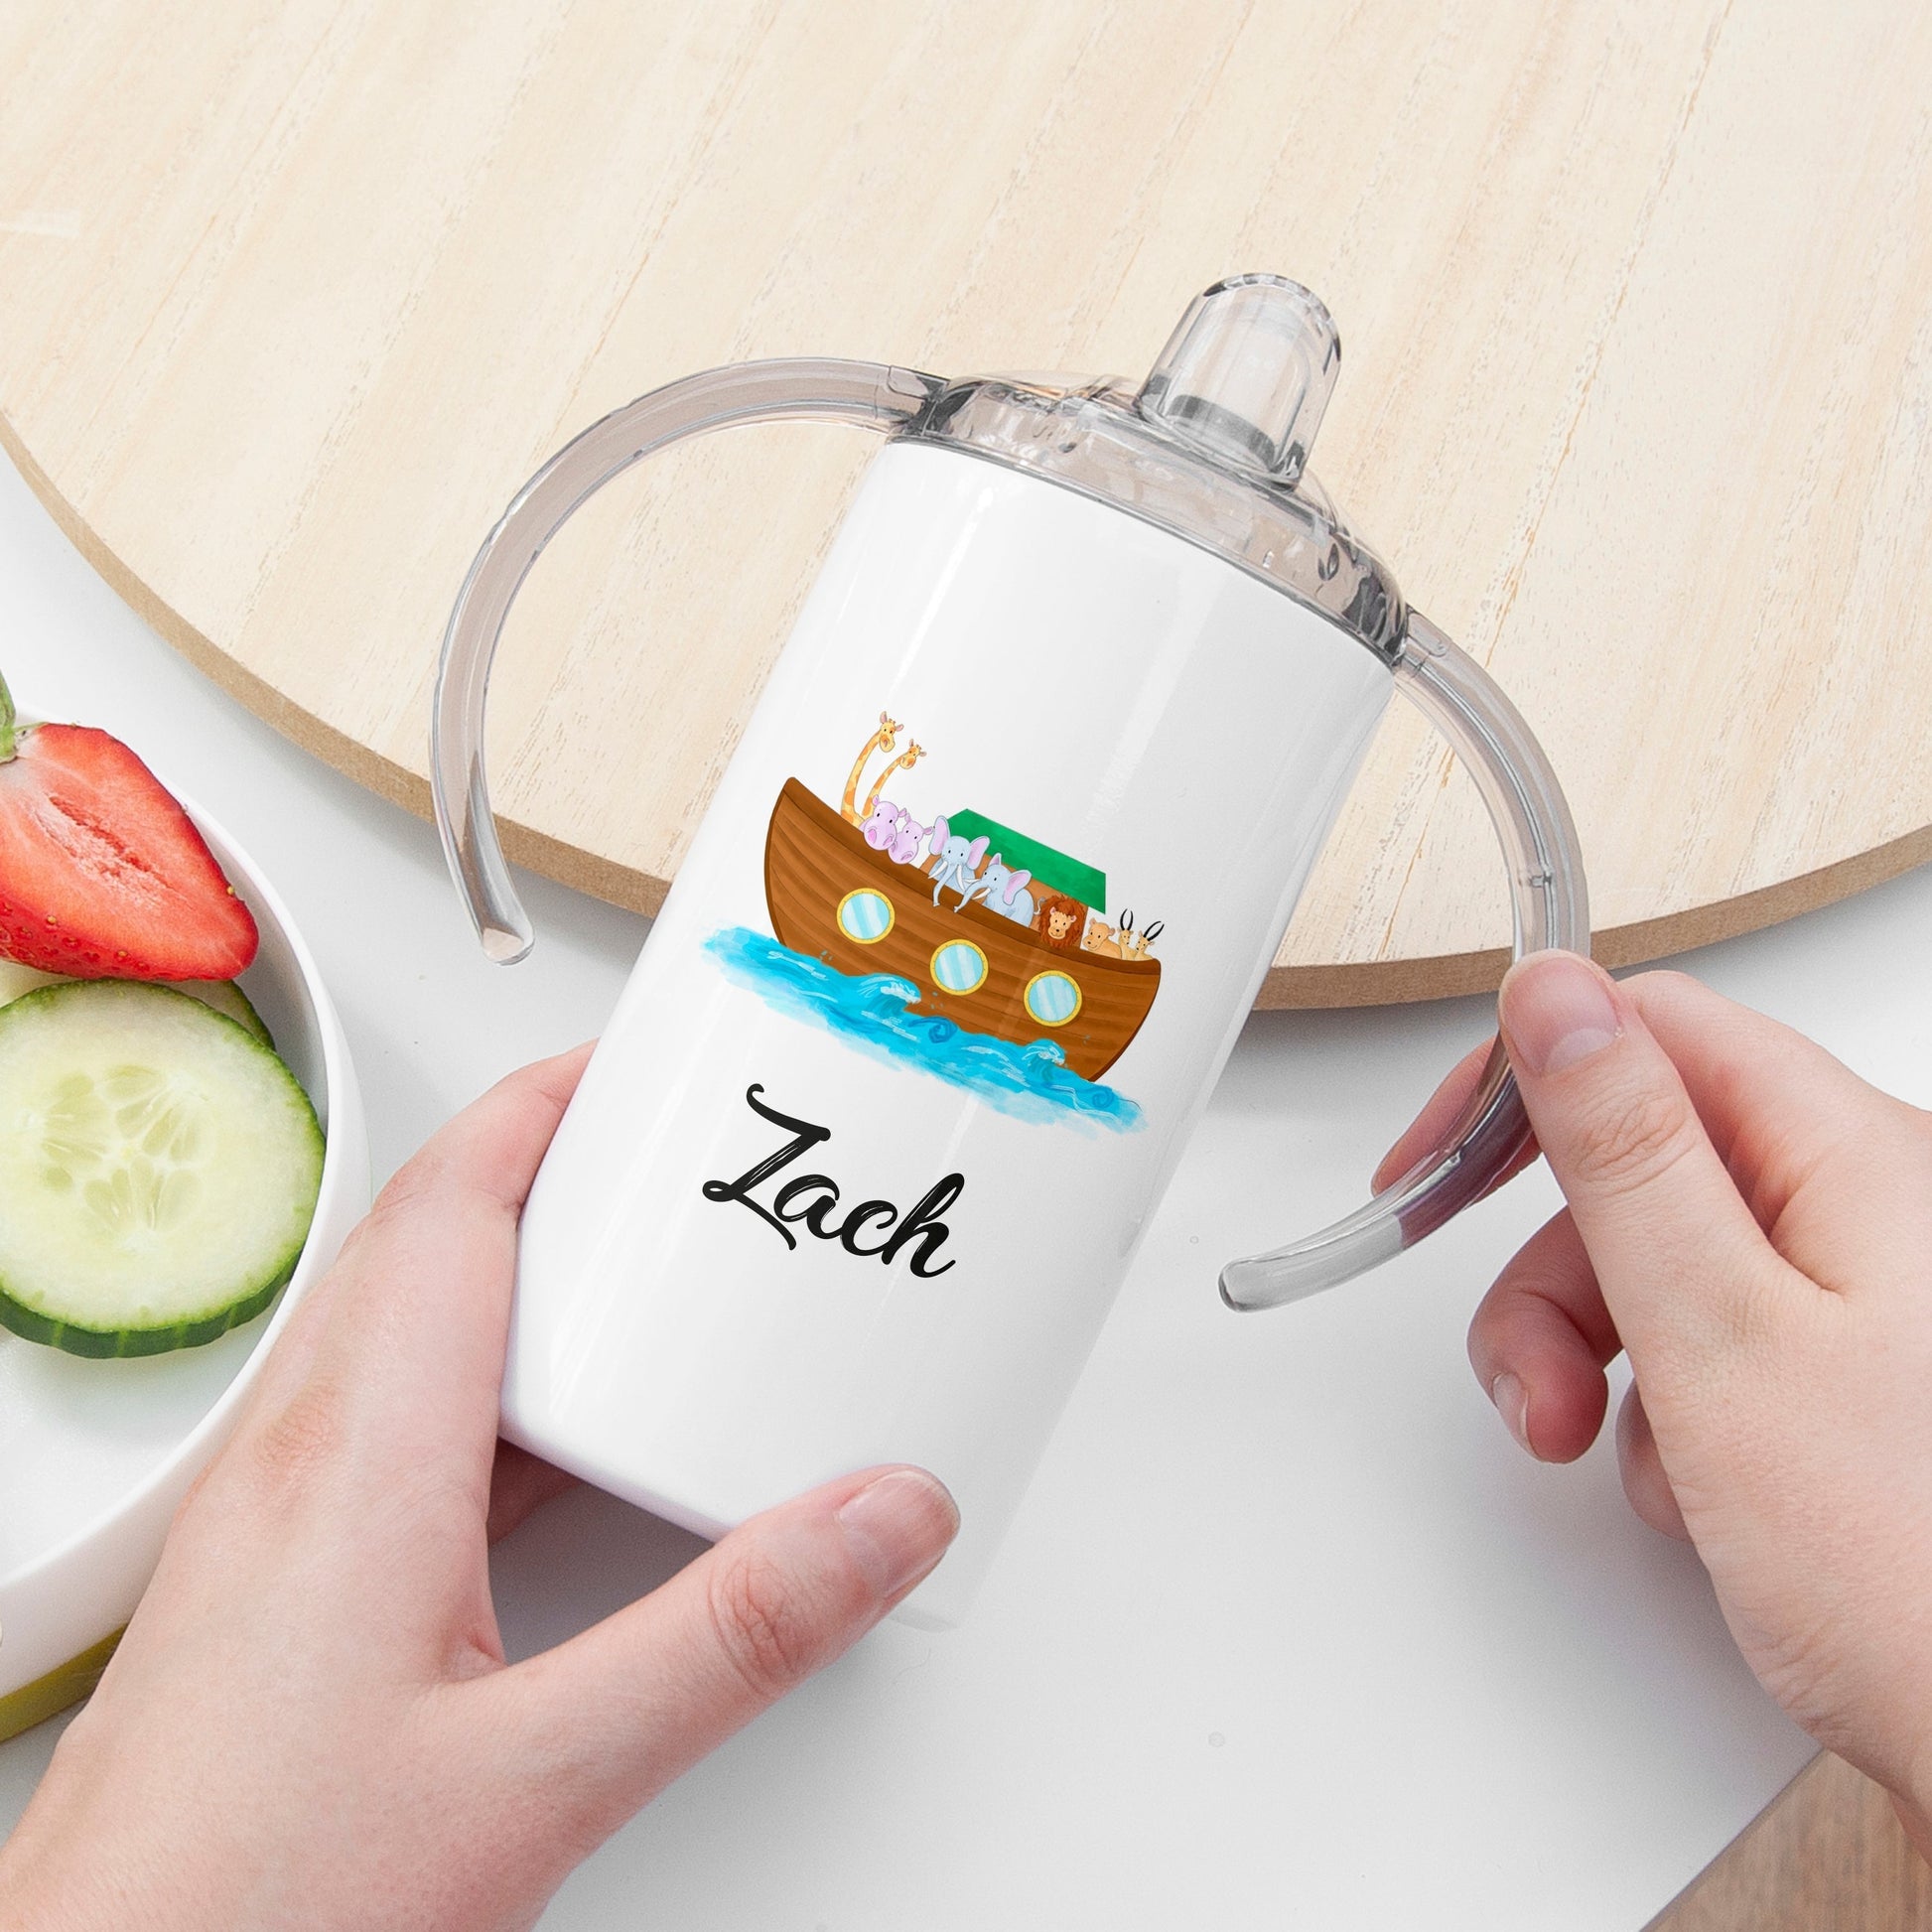 Personalized Mugs - Personalized Noah's Ark Kids Sippy Cup 